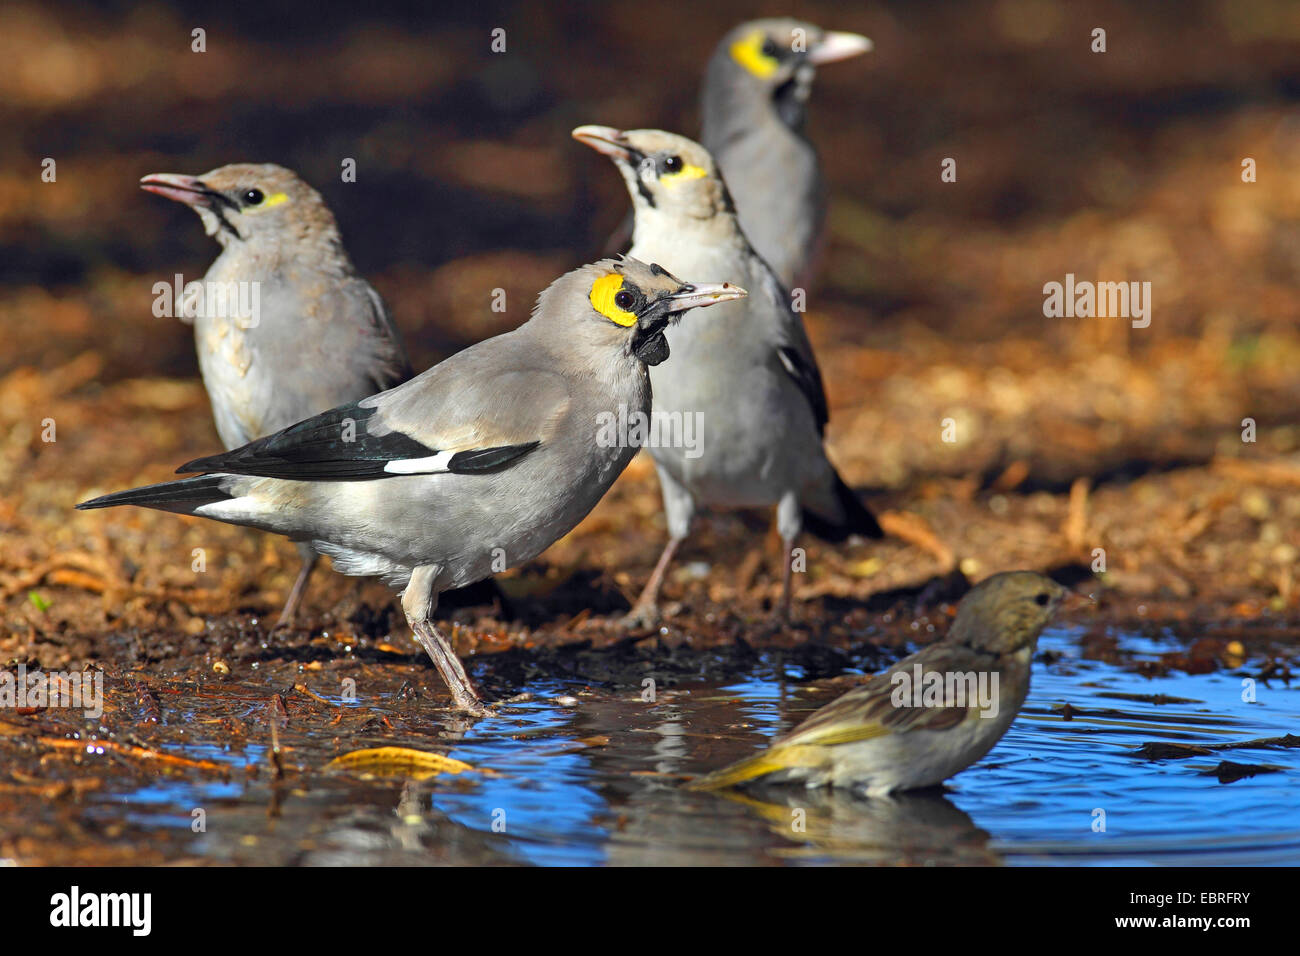 wattled starling (Creatophora cinerea), starlings in breeding plumage at a drinking place, South Africa, North West Province, Barberspan Bird Sanctuary Stock Photo